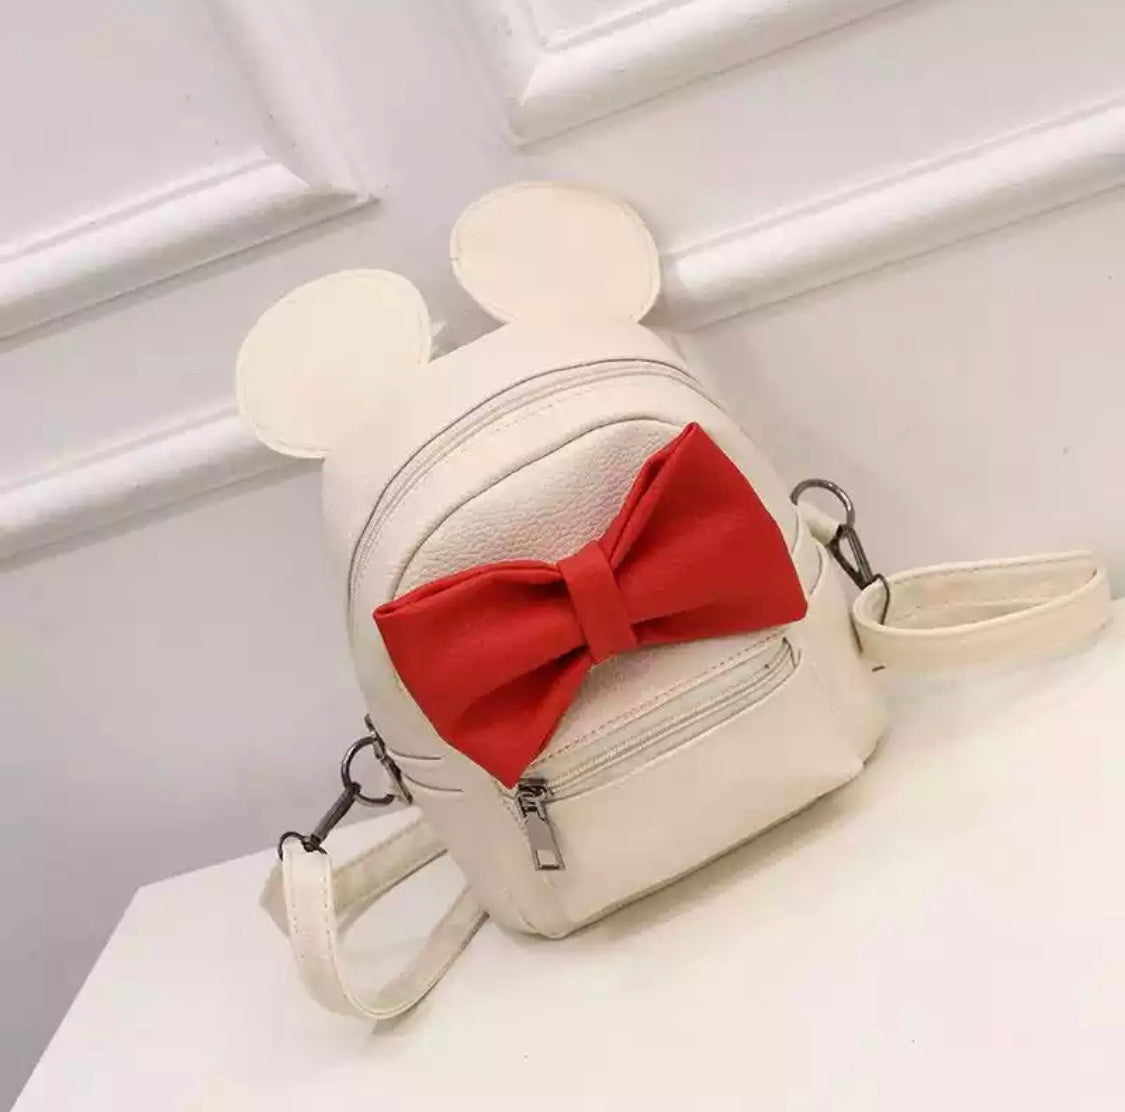 DDLGVERSE Mini Mouse Backpack White